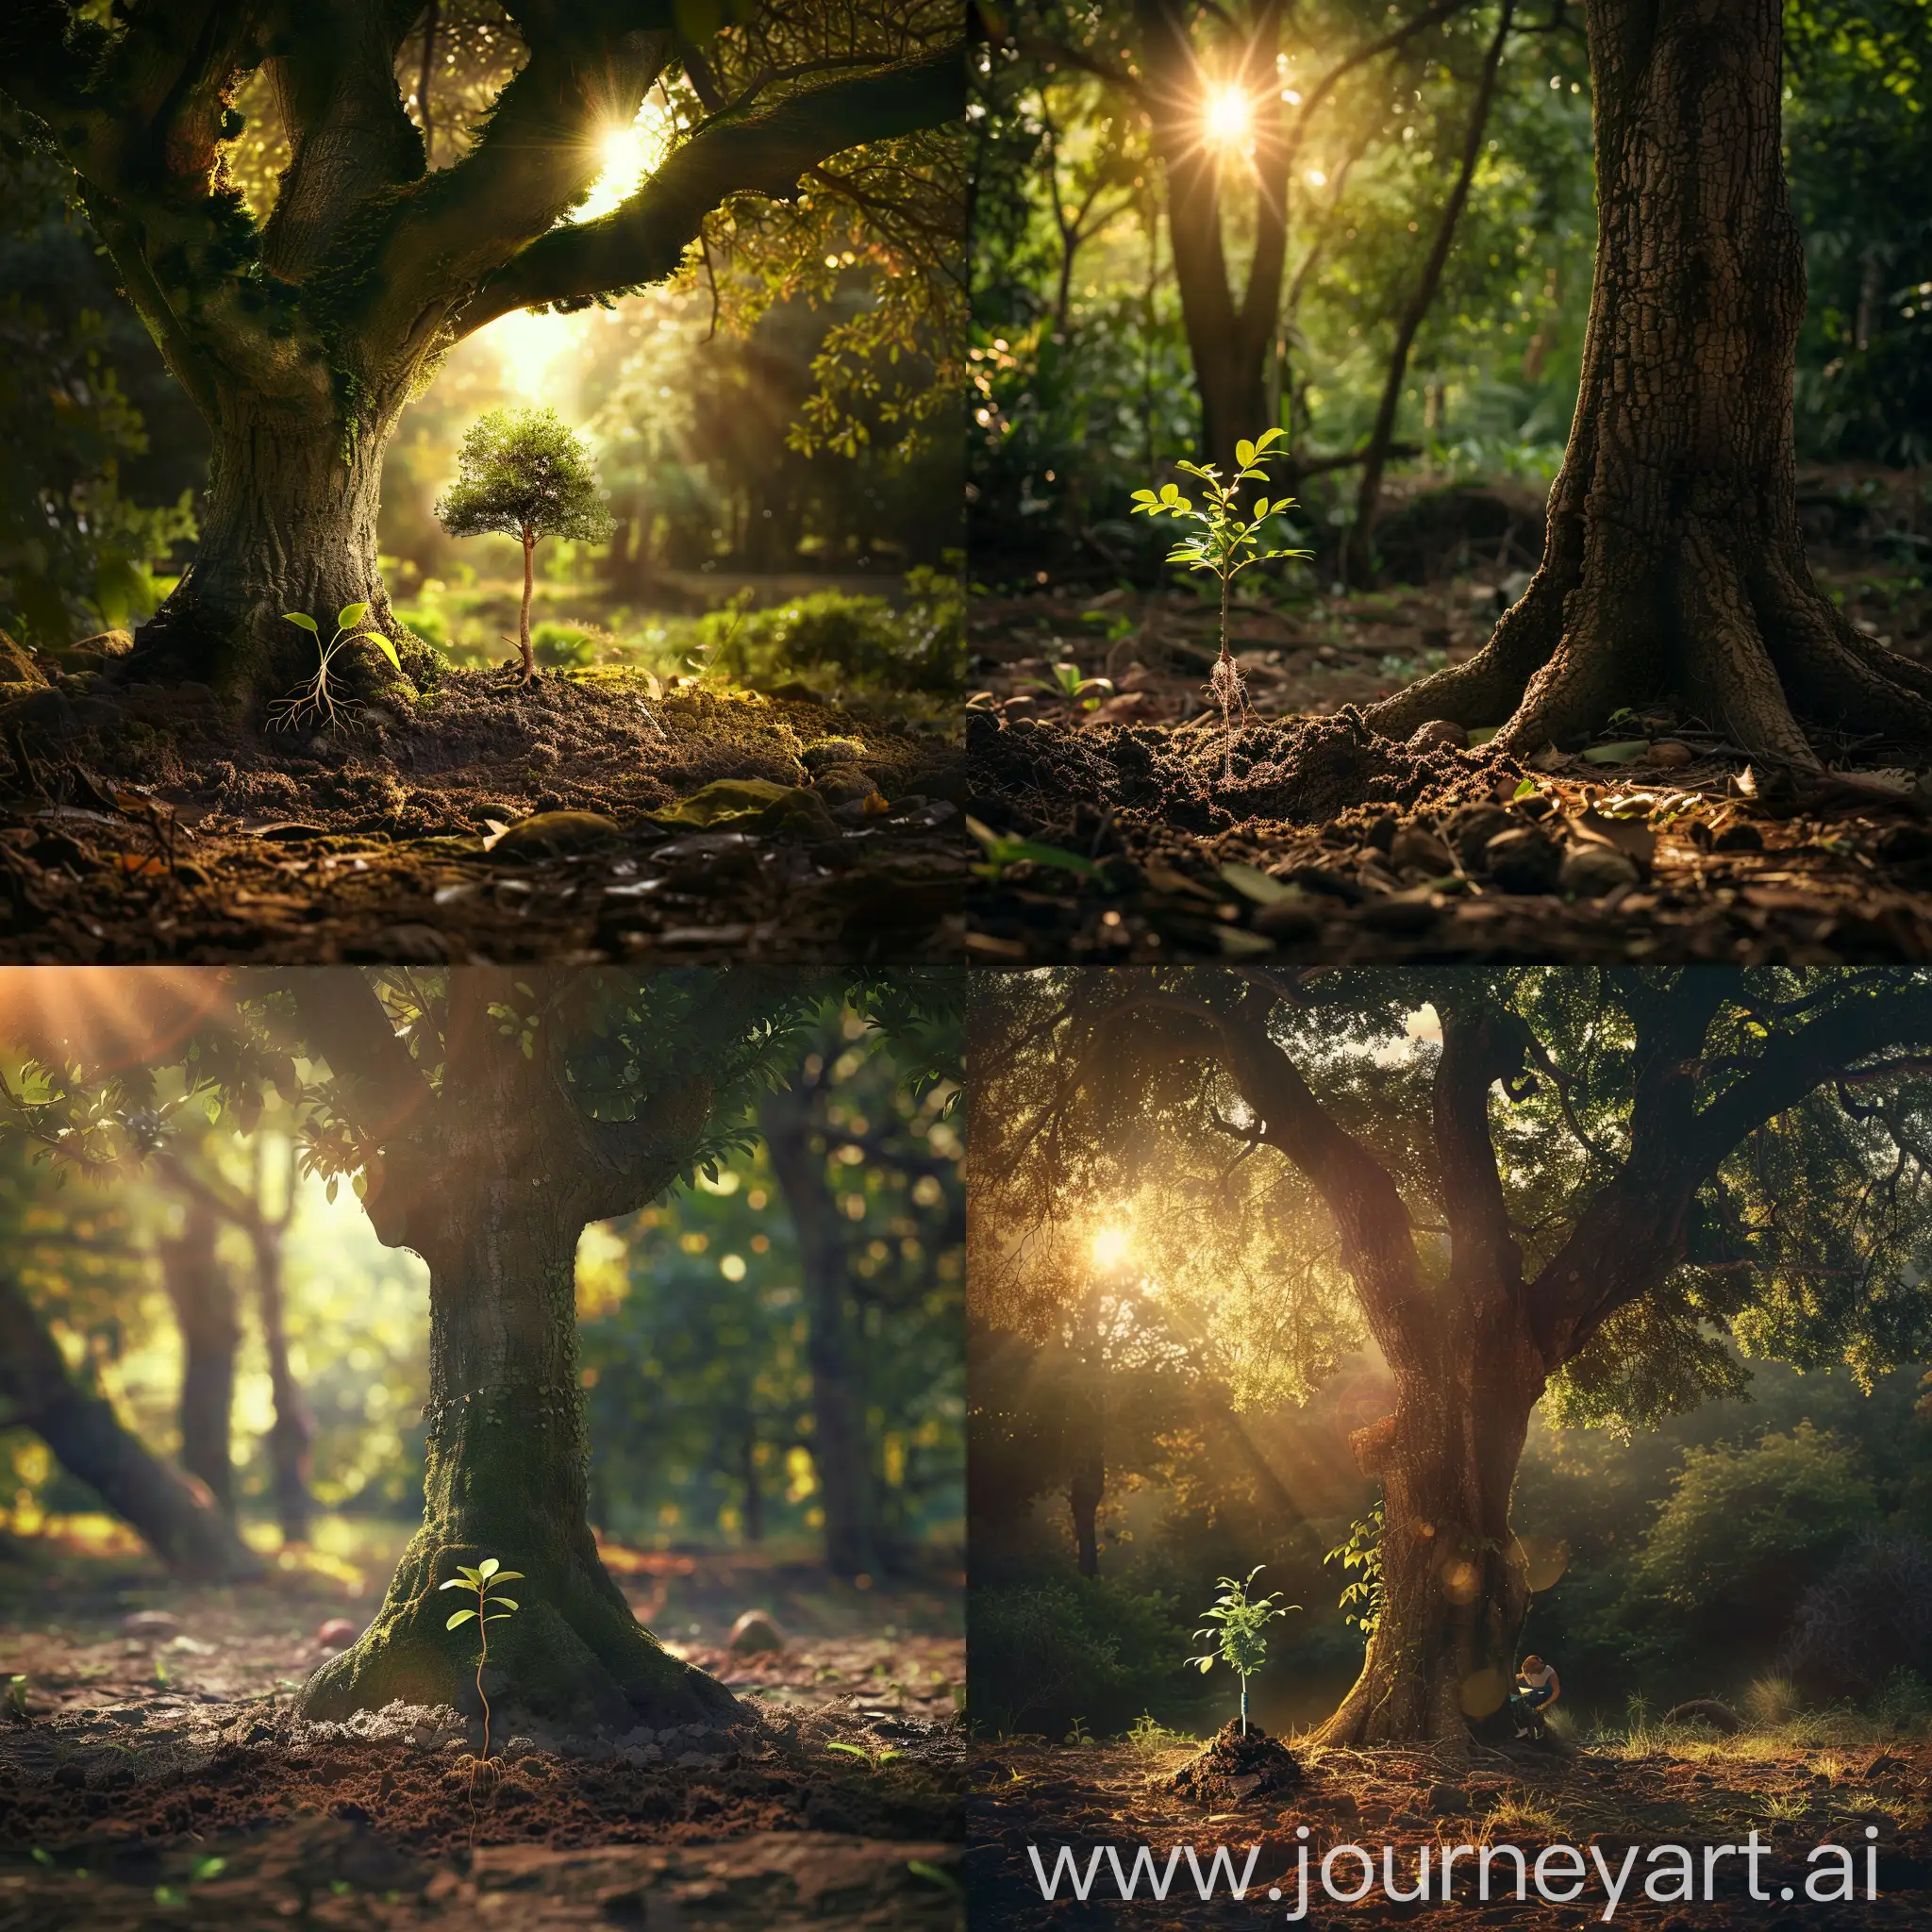 create a sunlit day in a forest with a mature tree. Underneath that mature tree there is a sprout for a tree being planted by a human